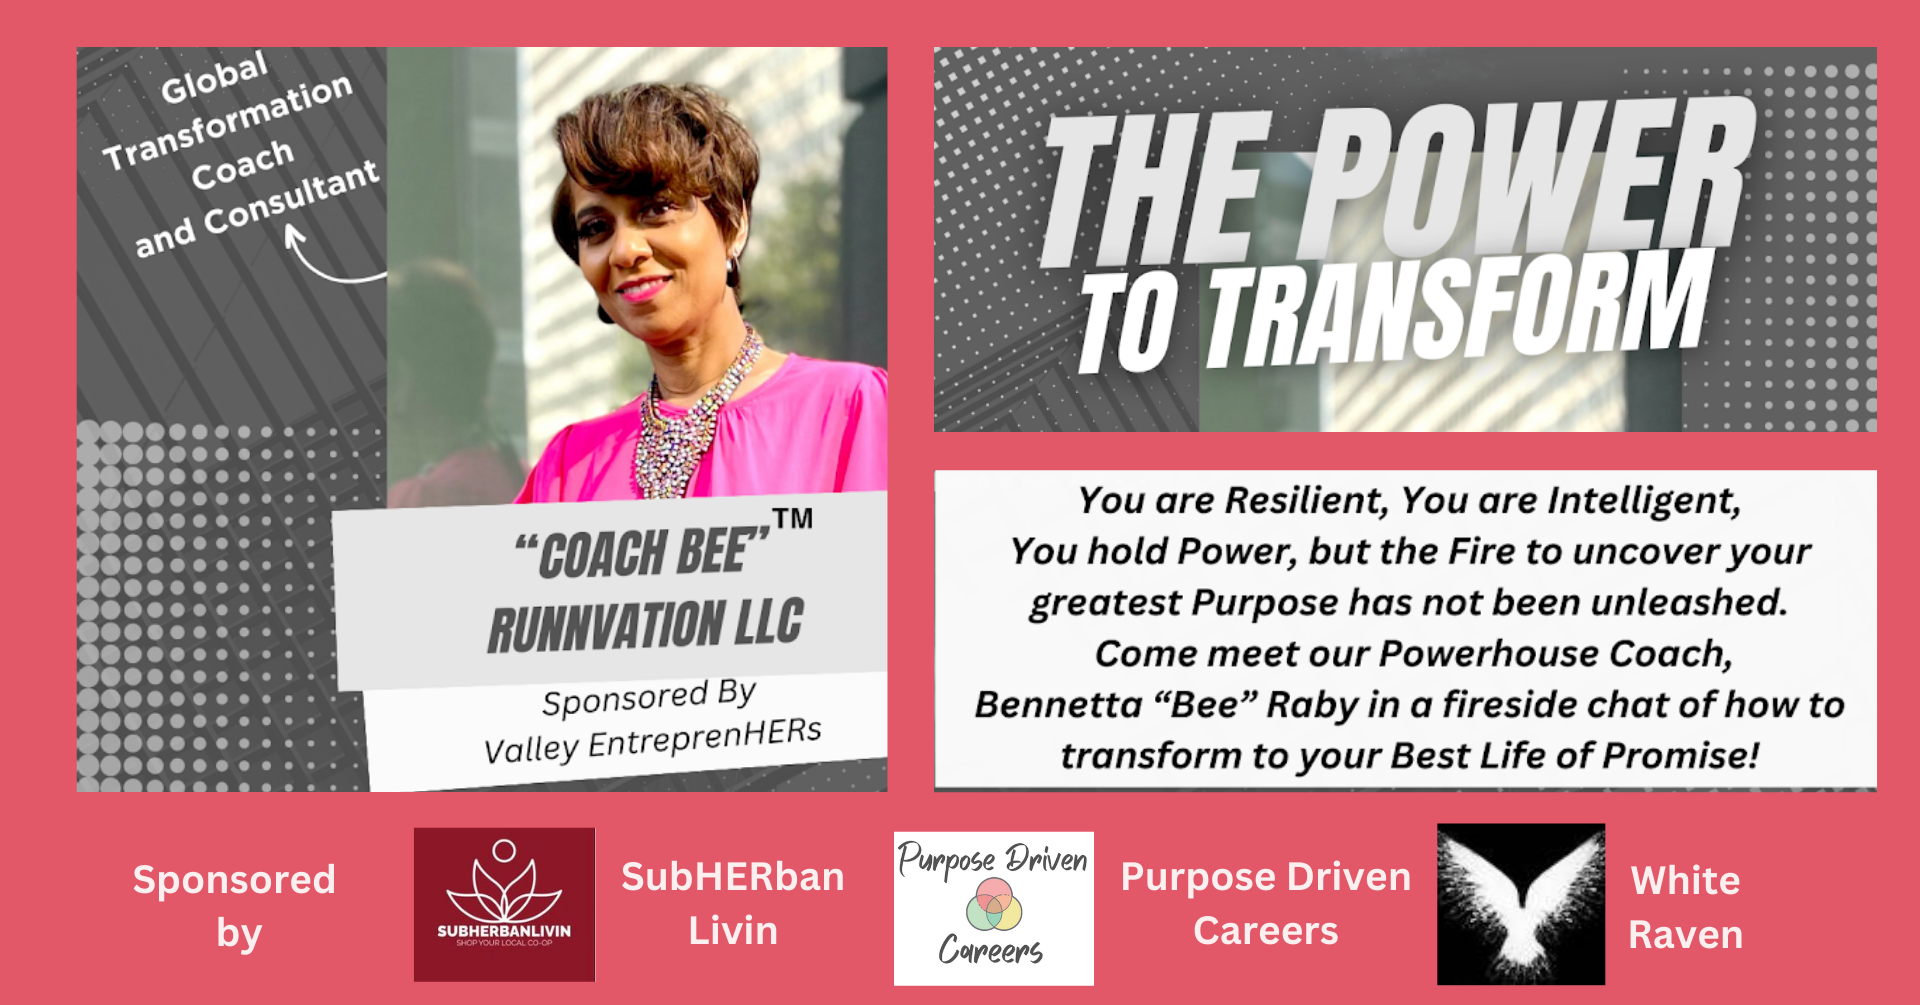  The Power To Transform Your Business and Career